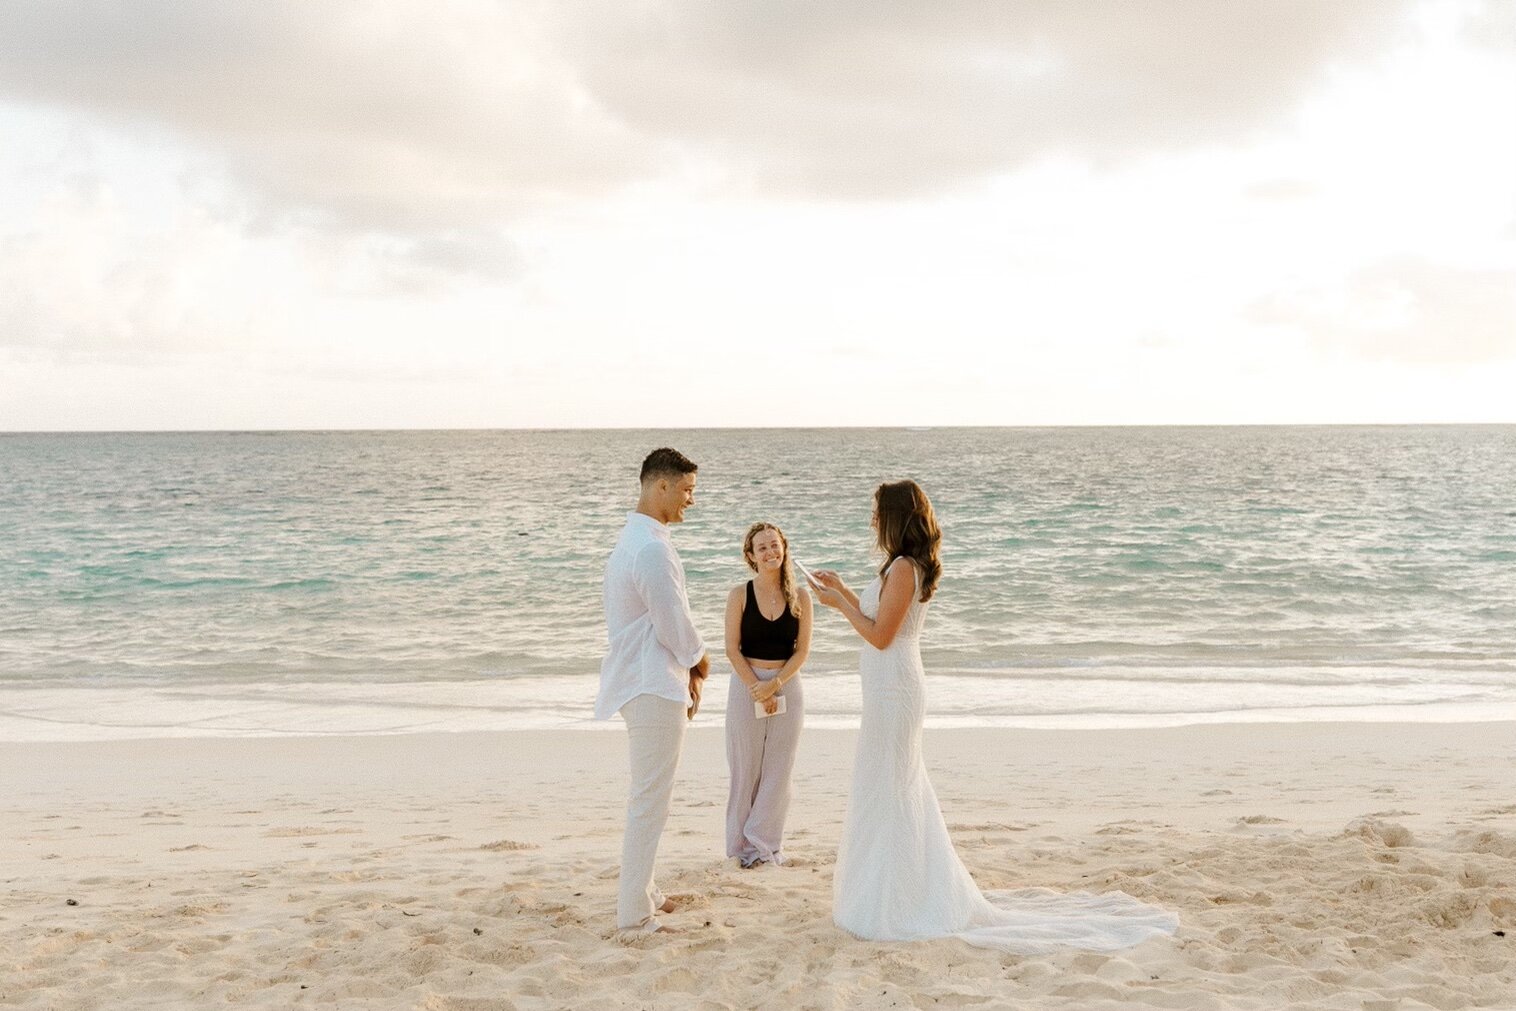 Bride and groom getting married in hawaii on the beach